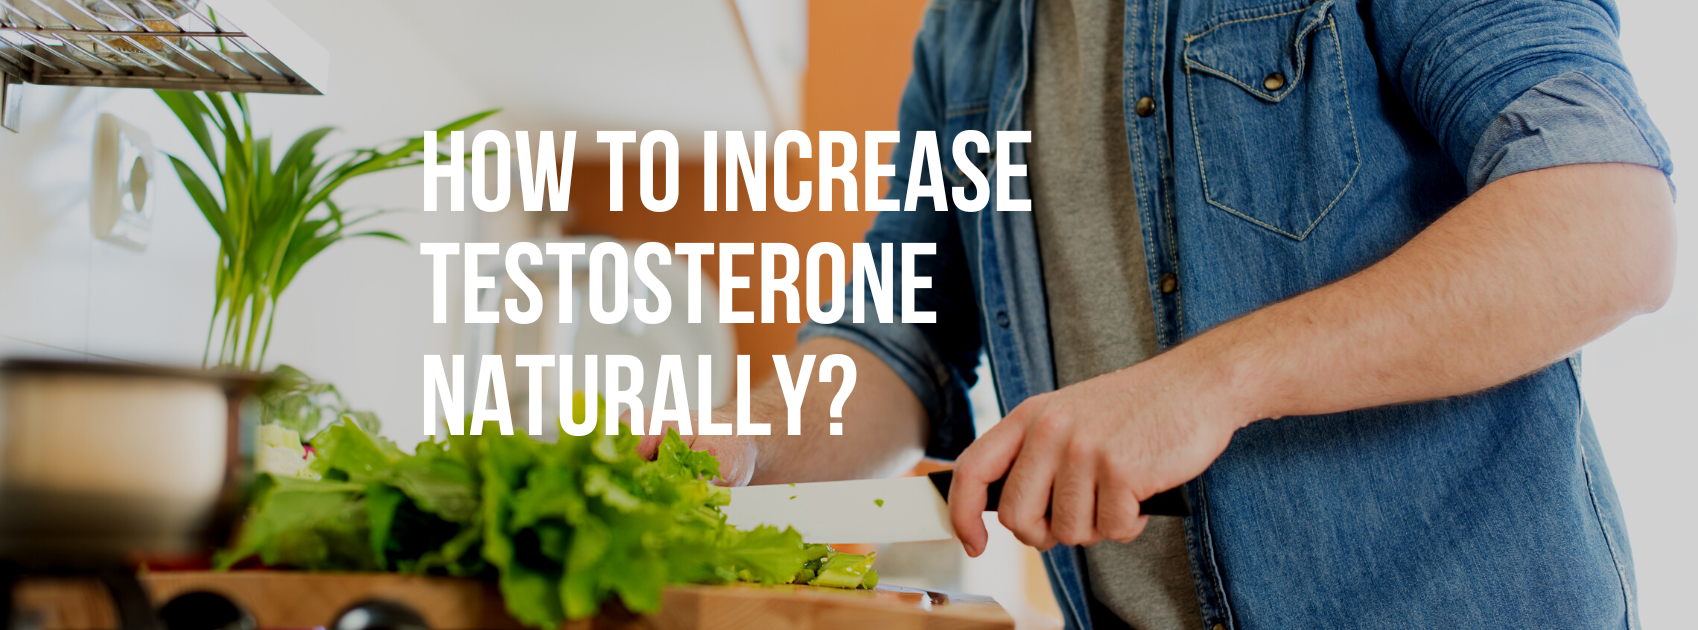 How to Increase Testosterone Naturally in Men?